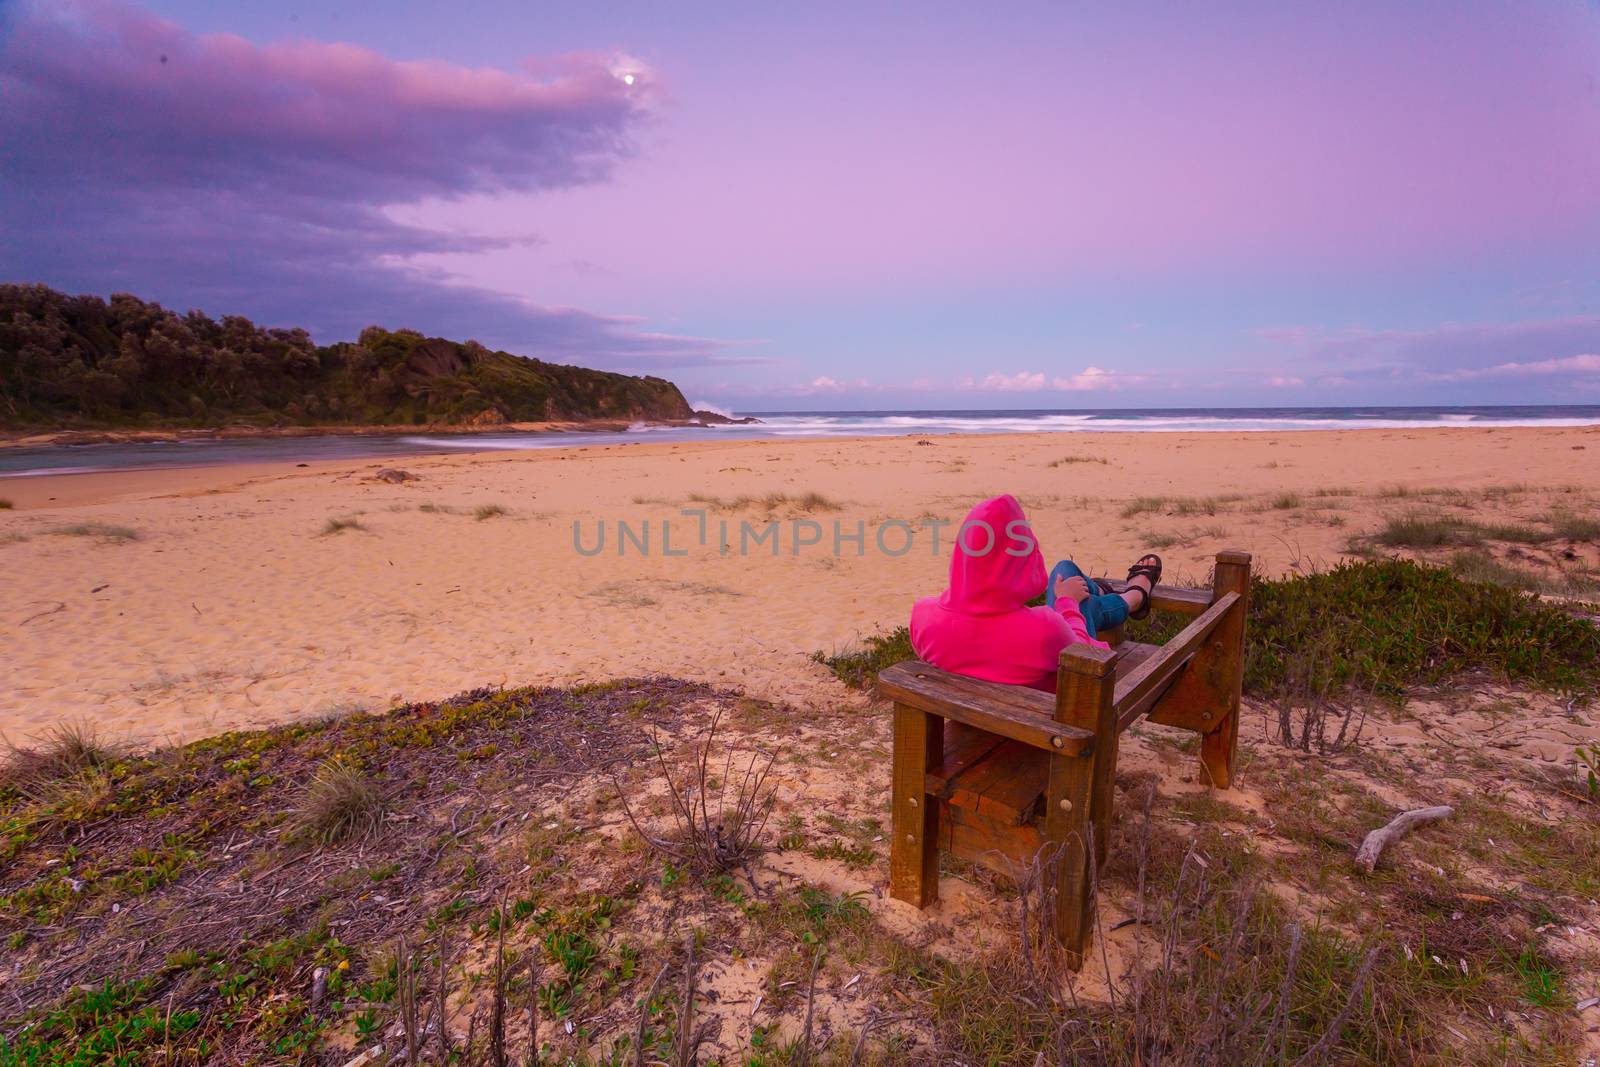 Woman relaxes on timber bench overlooking beach in the cool hues of dusk